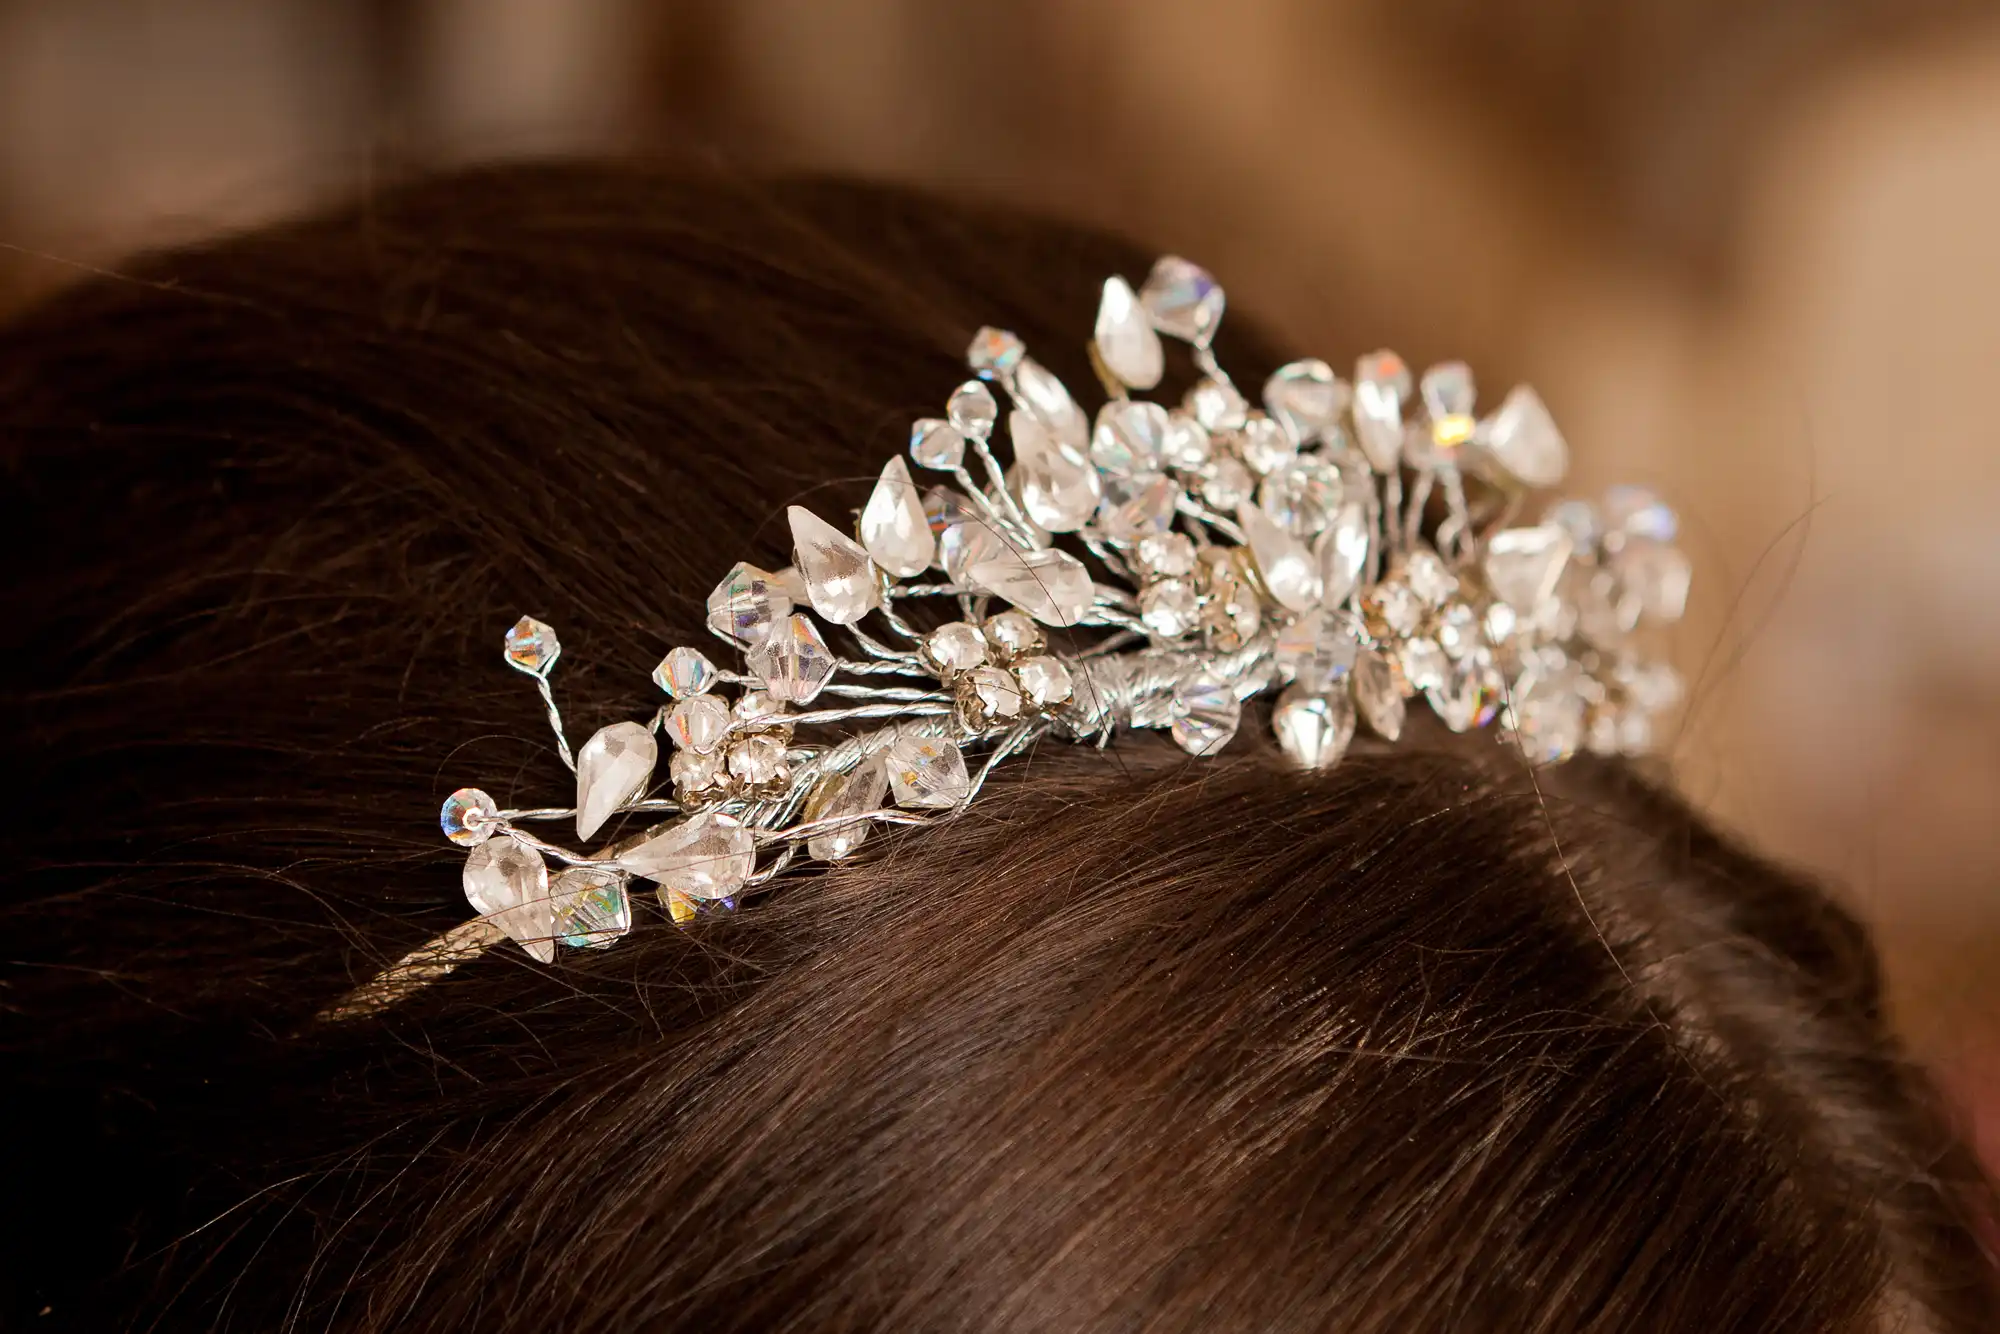 Close-up image of a sparkling crystal tiara on a person's brunette hair, highlighting intricate details and reflections.